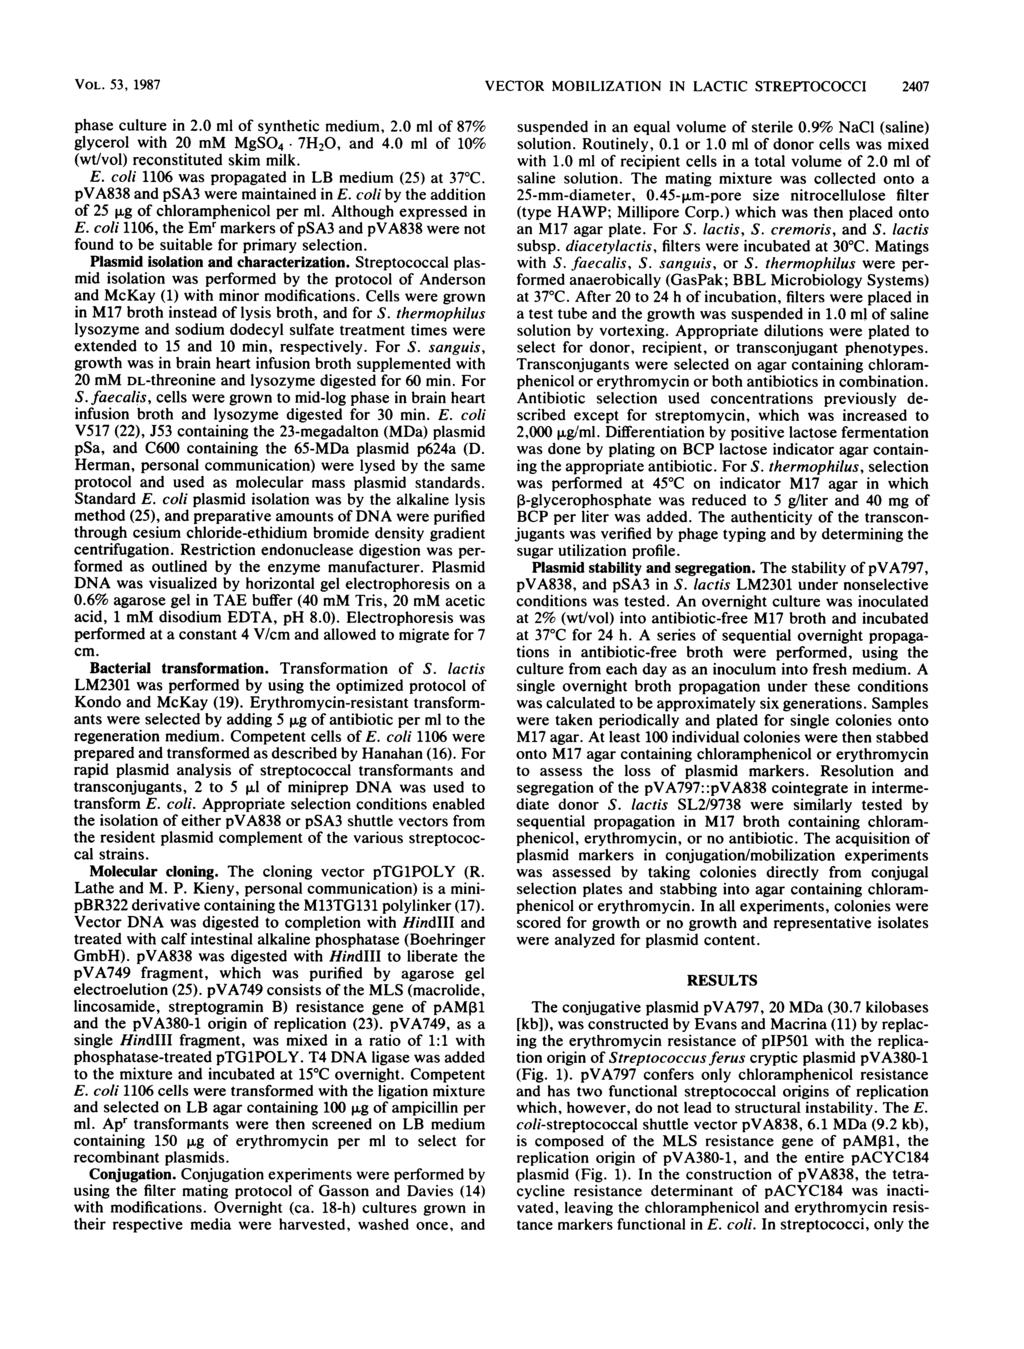 VOL. 53, 1987 VECTOR MOBILIZATION IN LACTIC STREPTOCOCCI 2407 phase culture in 2.0 ml of synthetic medium, 2.0 ml of 87% glycerol with 20 mm MgSO4. 7H20, and 4.